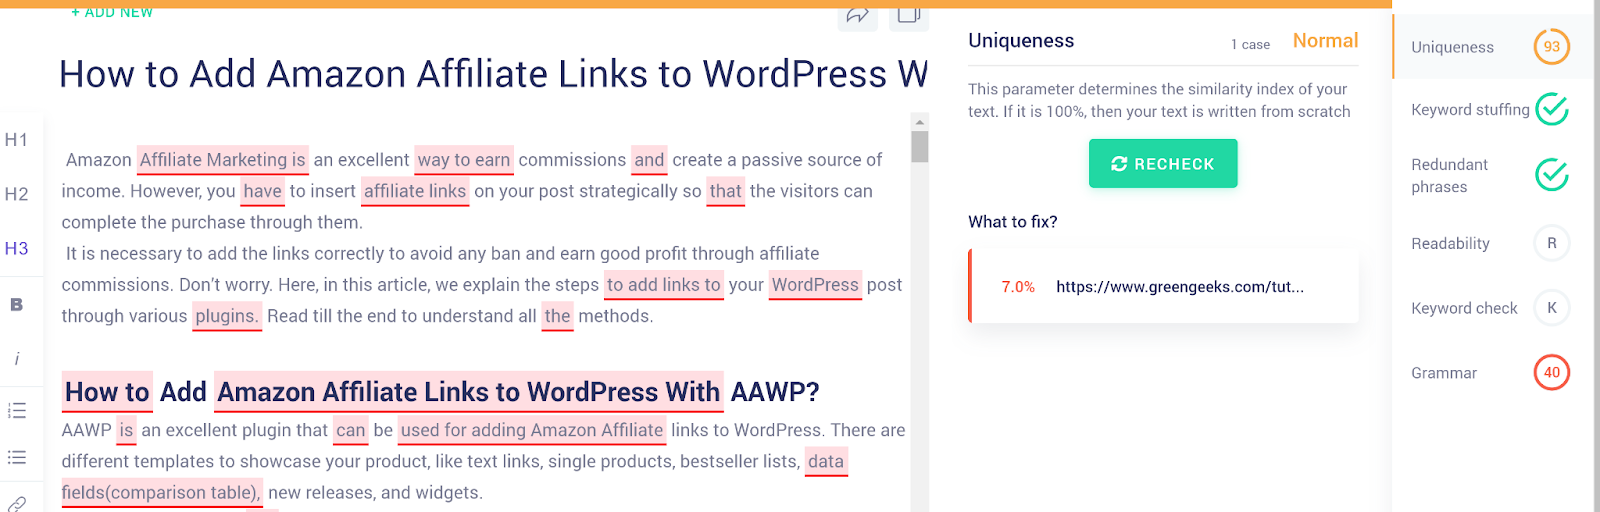 How to Embed  Shorts into a WordPress Website - GreenGeeks